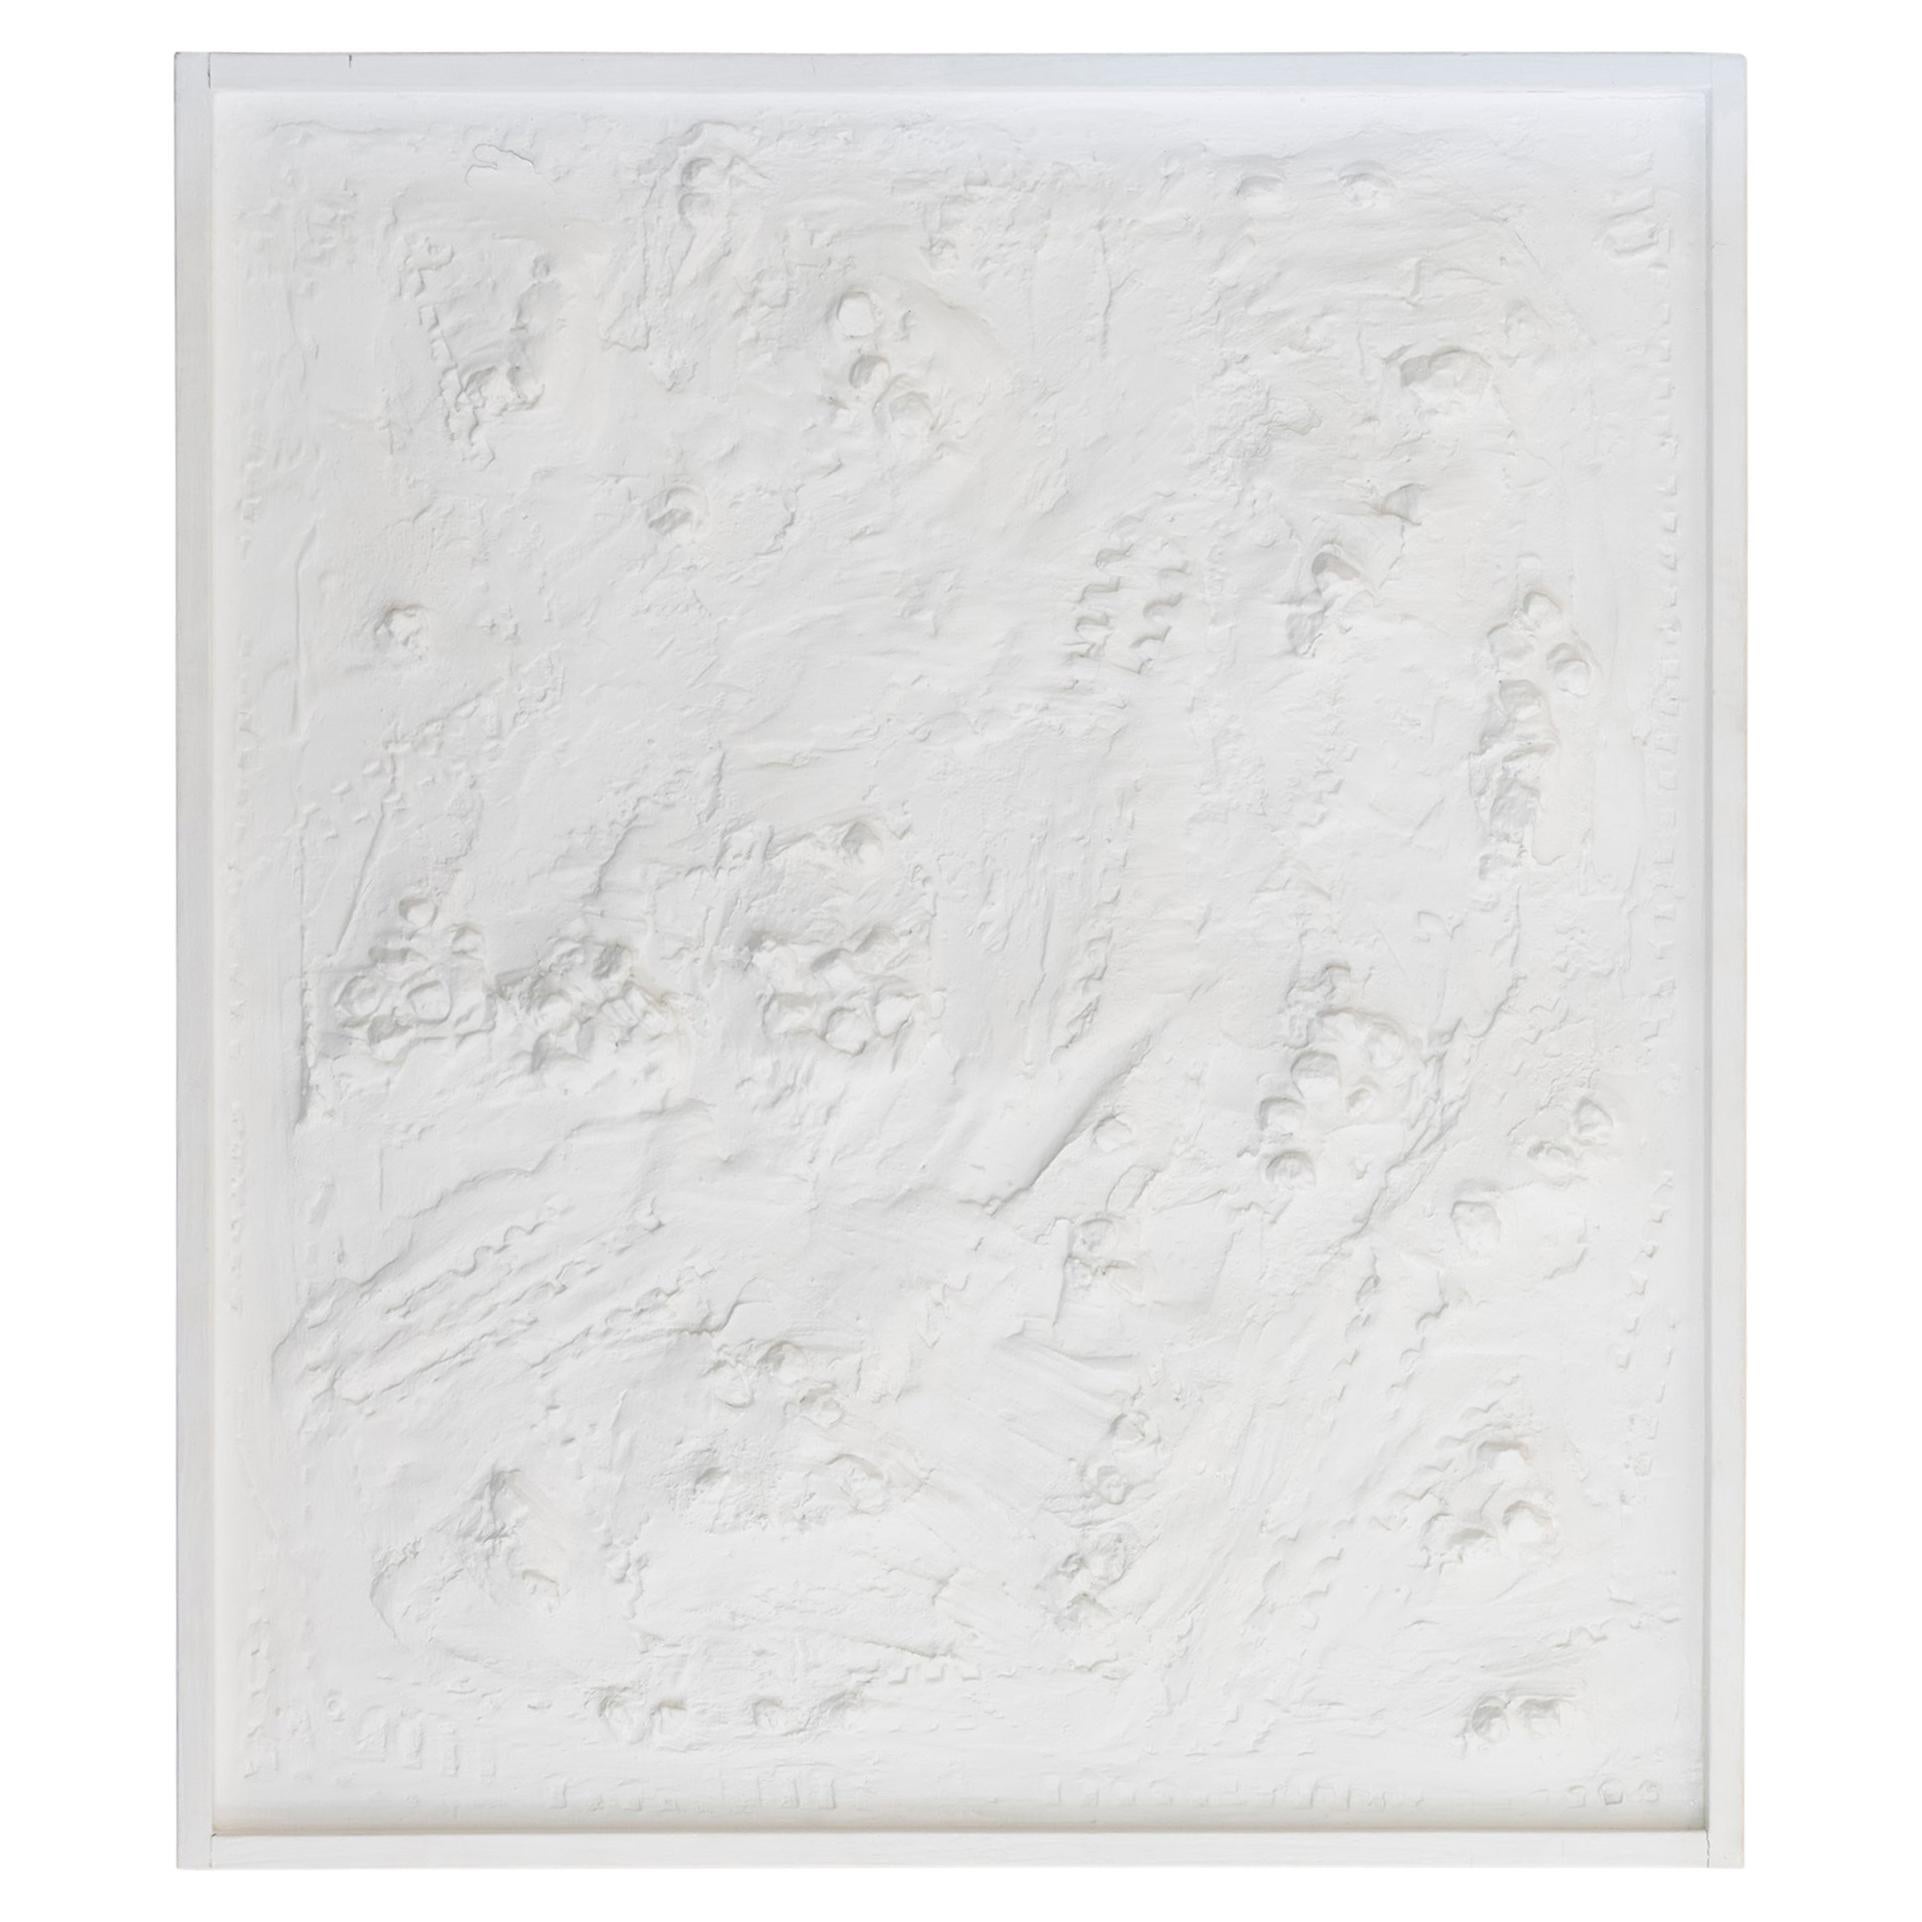 Andrea Brandi "Untitled" White Plaster/Stones/Acrylics Abstract Painting, 2016 For Sale